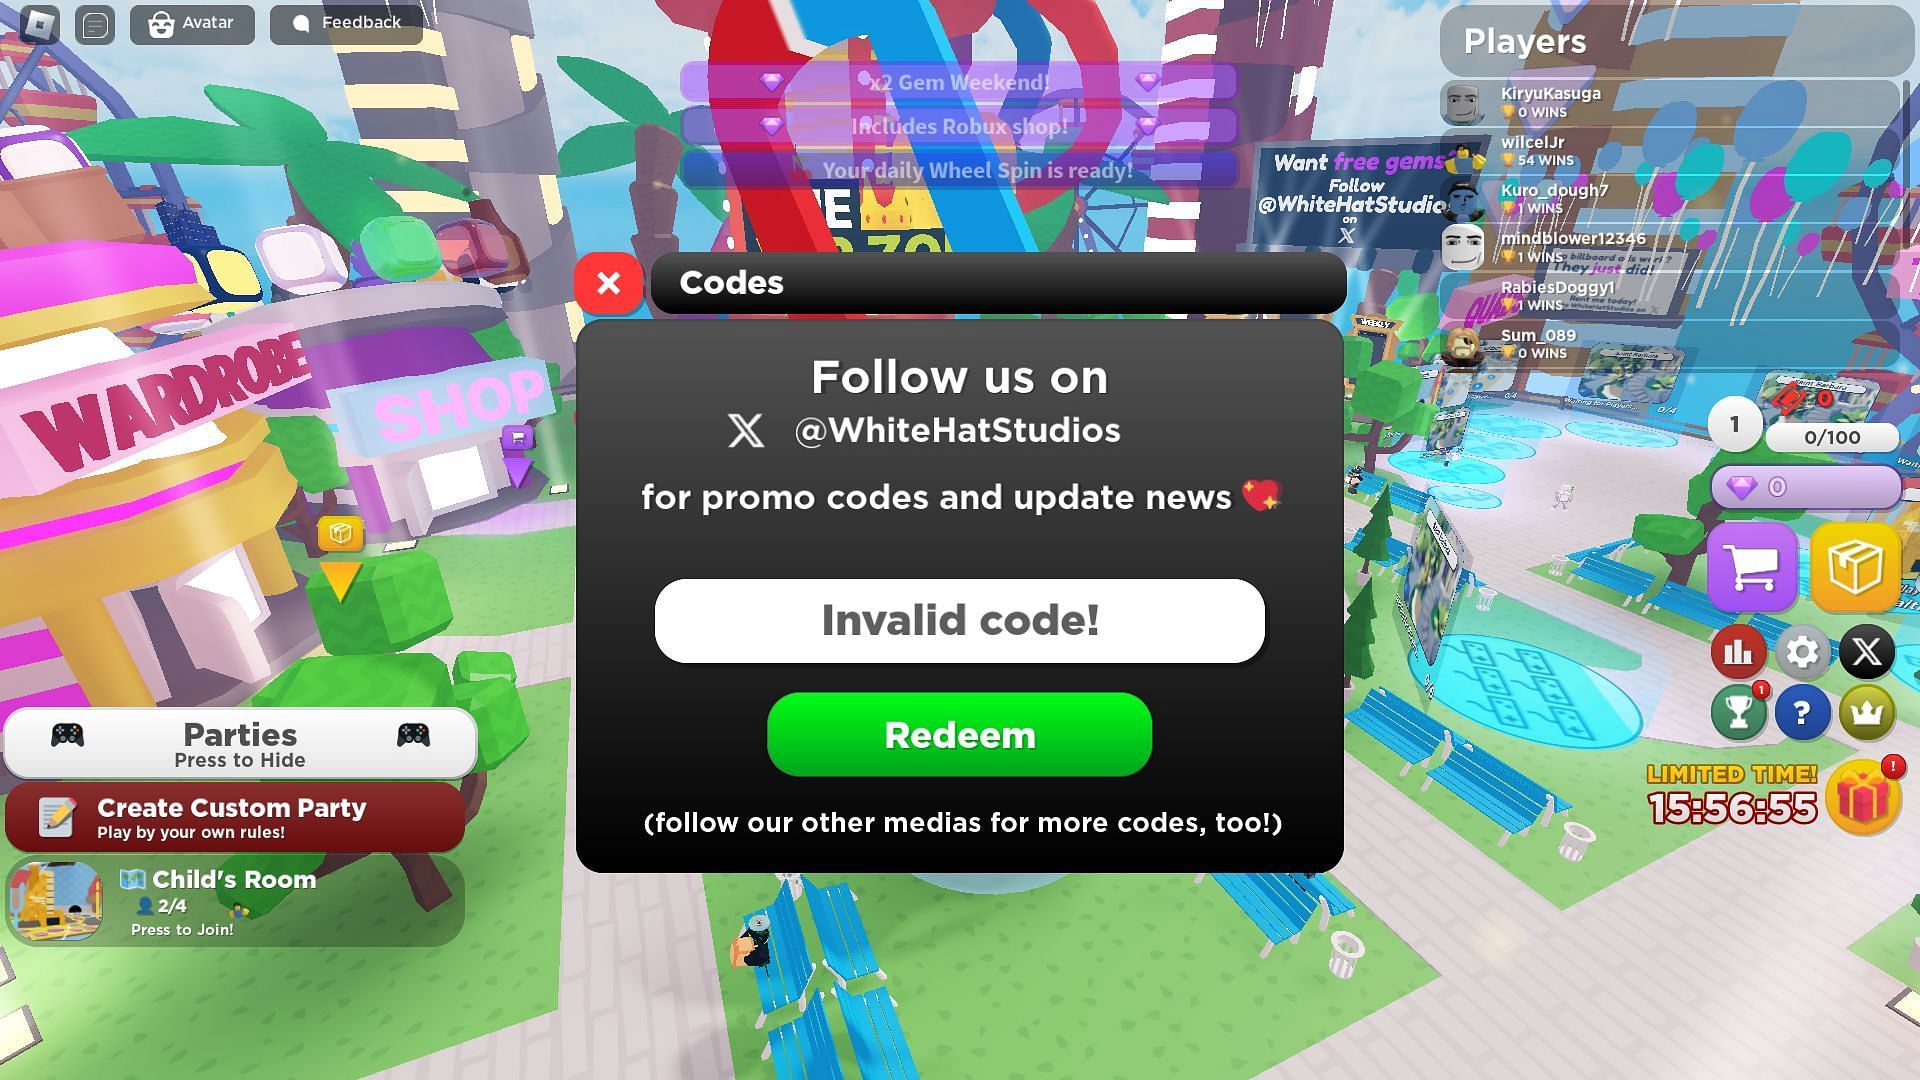 Troubleshooting codes for Roblox Party (Image via Roblox)